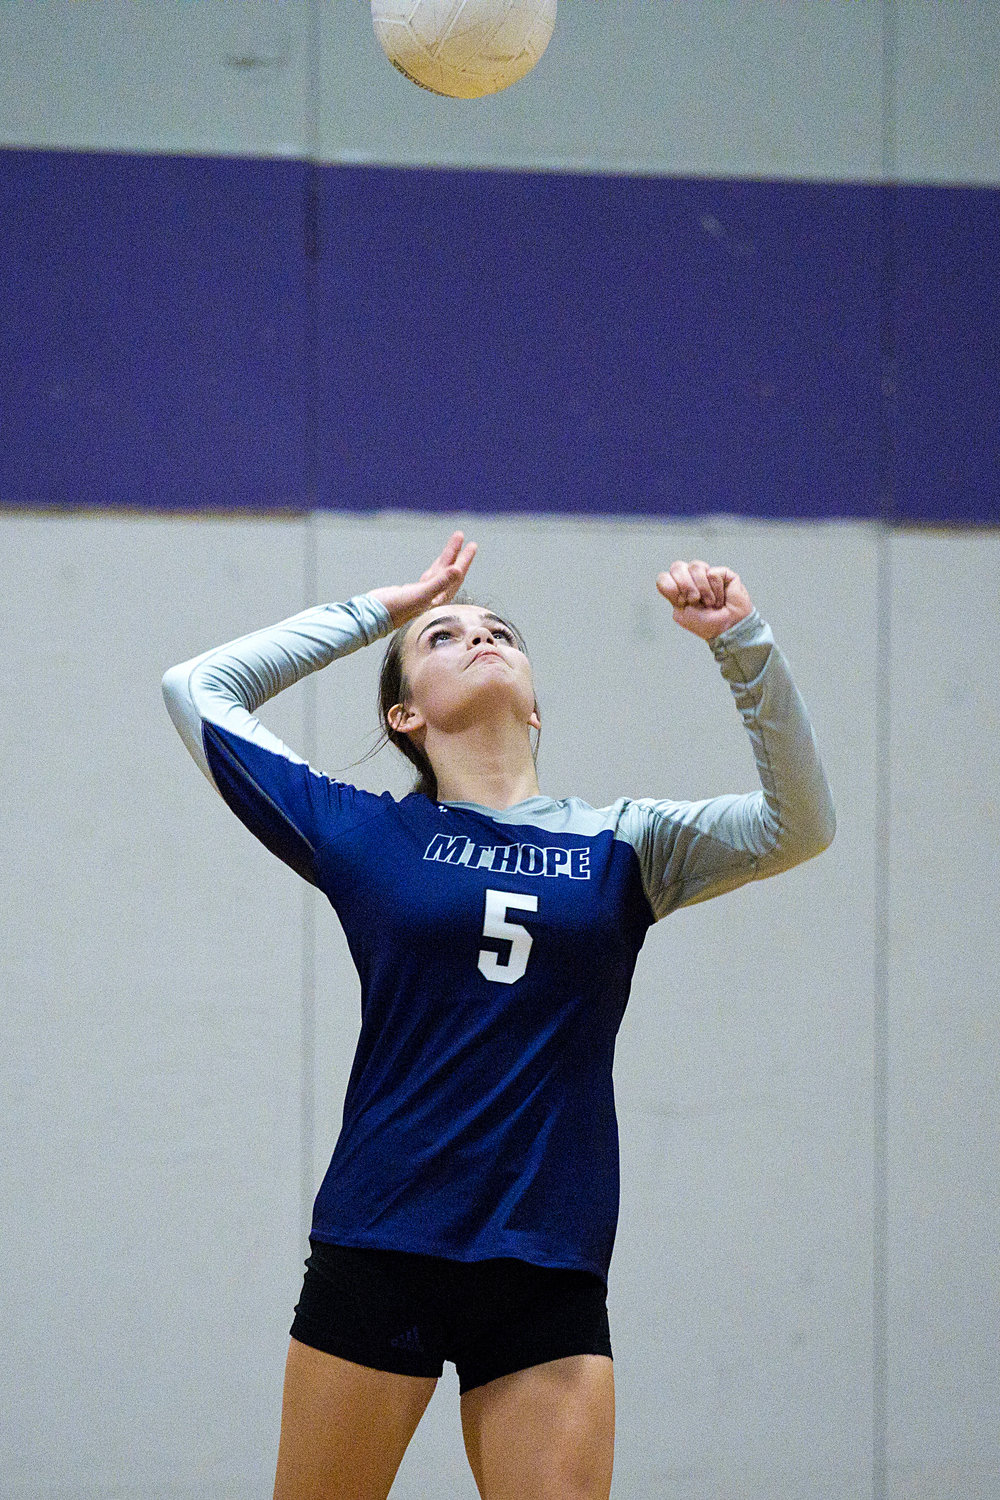 Sarah Wilcox serves the ball to Lincoln while competing in the DII Preliminary game, Tuesday.